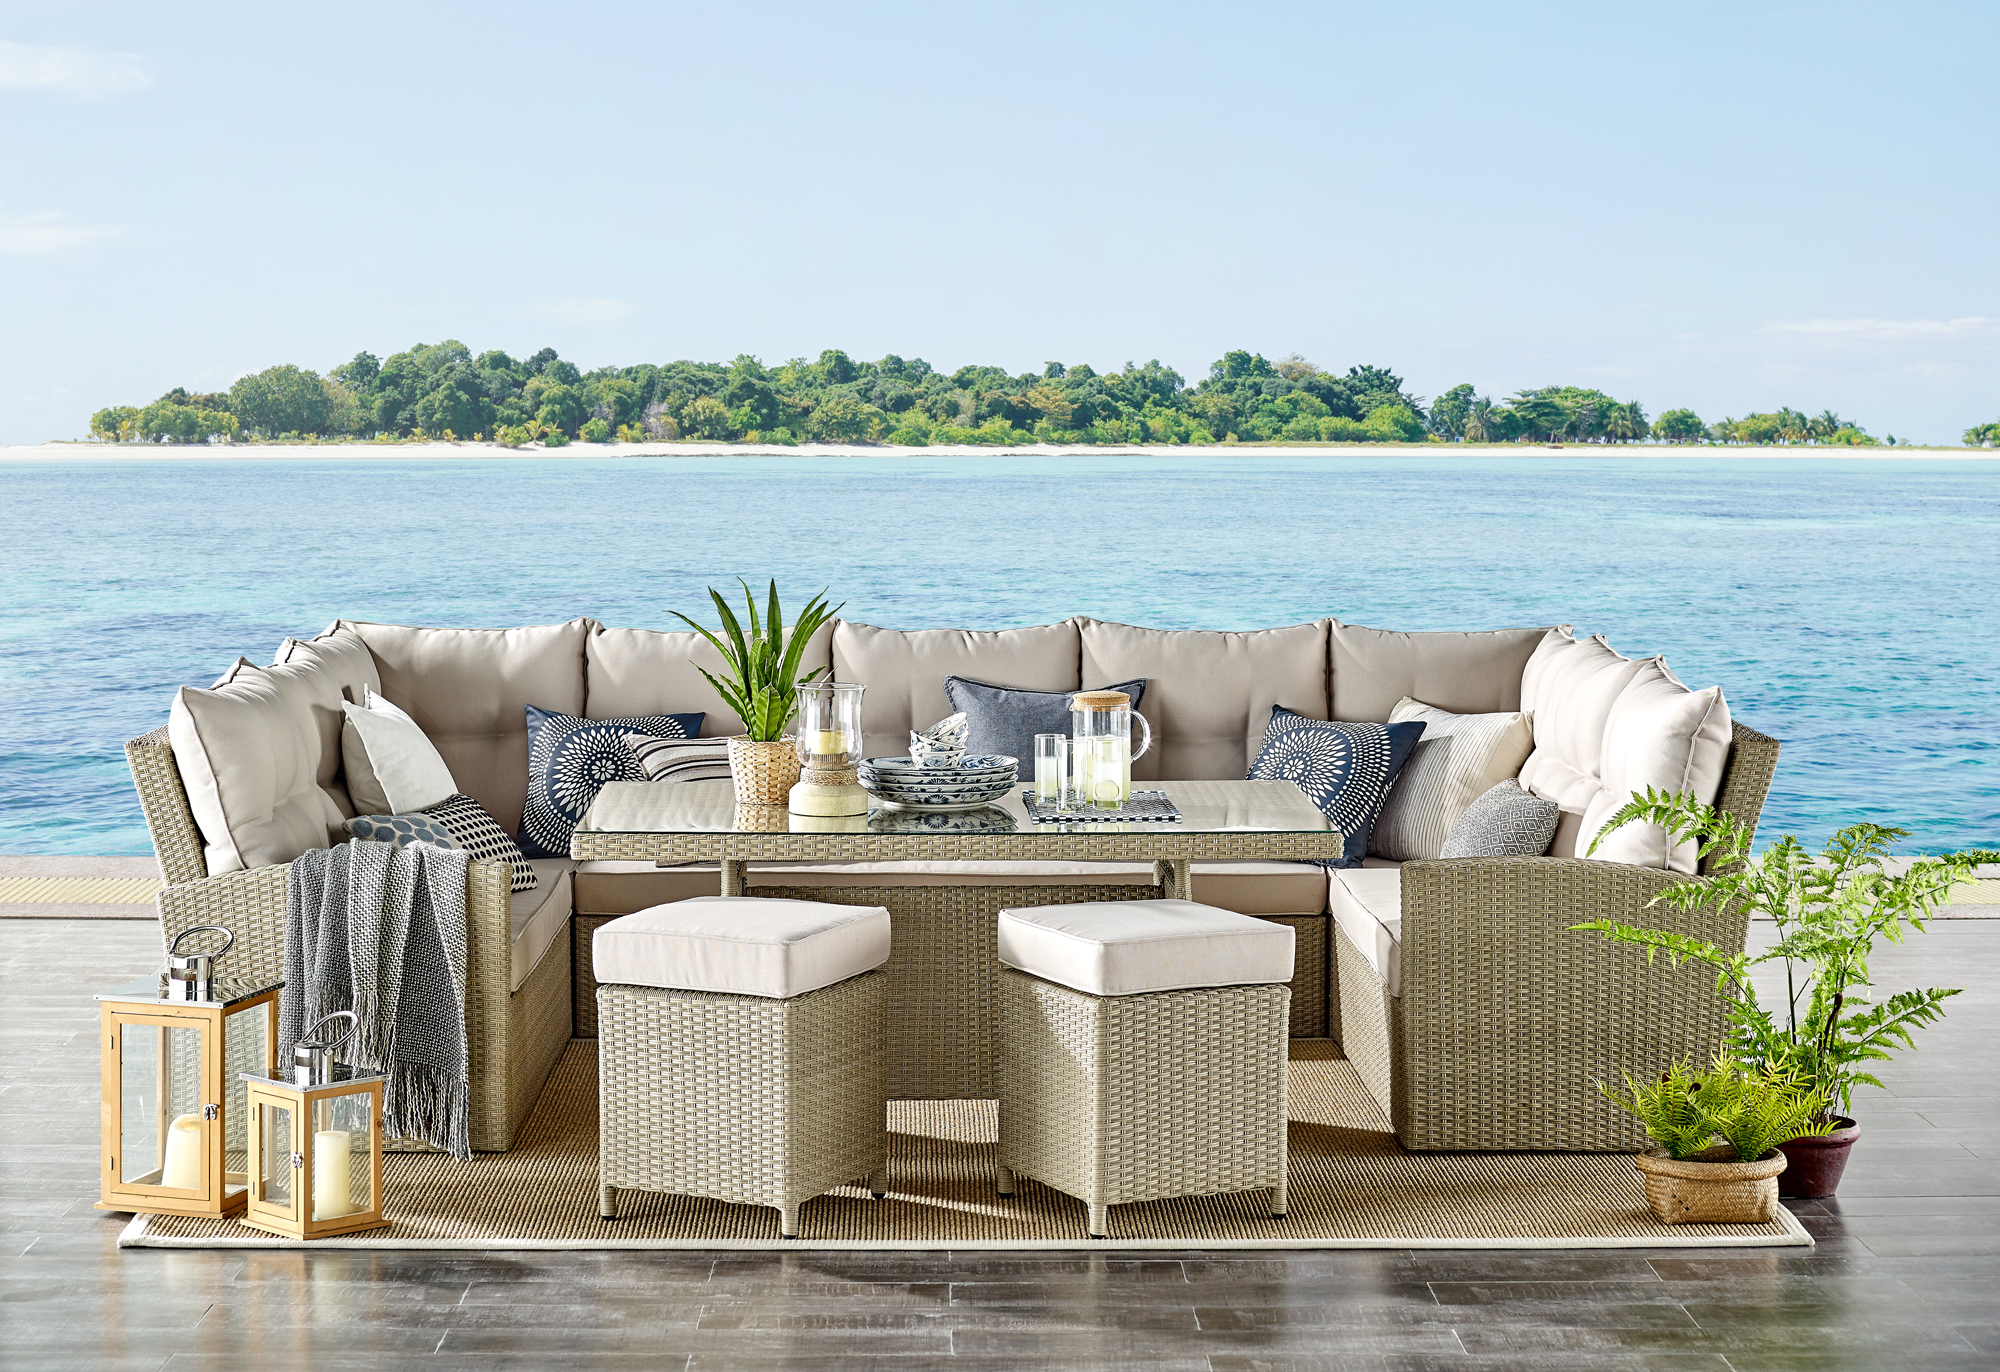 Canaan All-Weather Wicker Outdoor Horseshoe Sectional Sofa with Cream Cushions - image 1 of 4